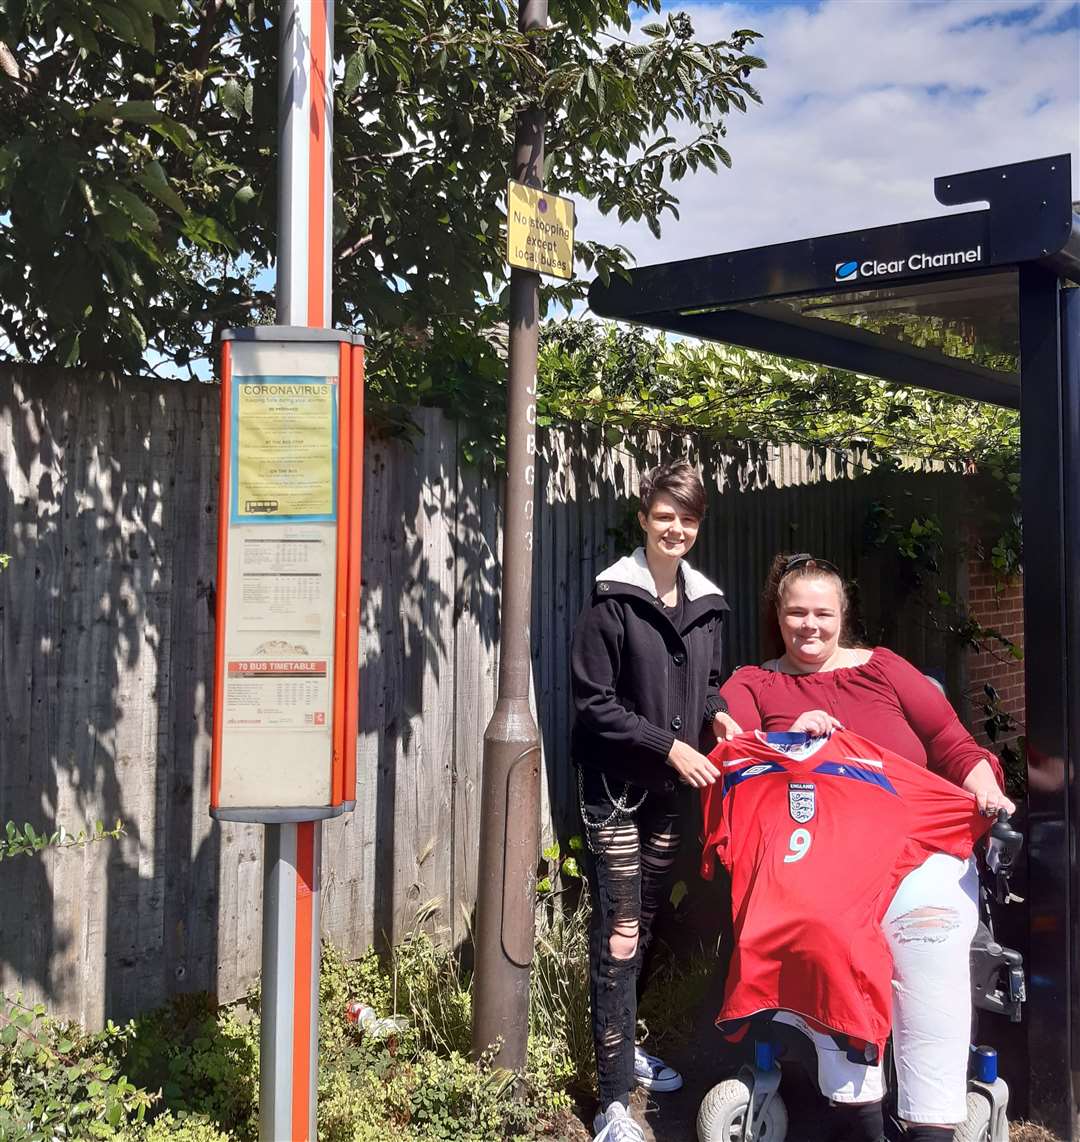 Larkfield resident Emma Wild and her daughter at the Southey Way bus stop in Chaucer Way. Ms Wild is pictured with her England shirt she wore last week when trying to get to the Euros game